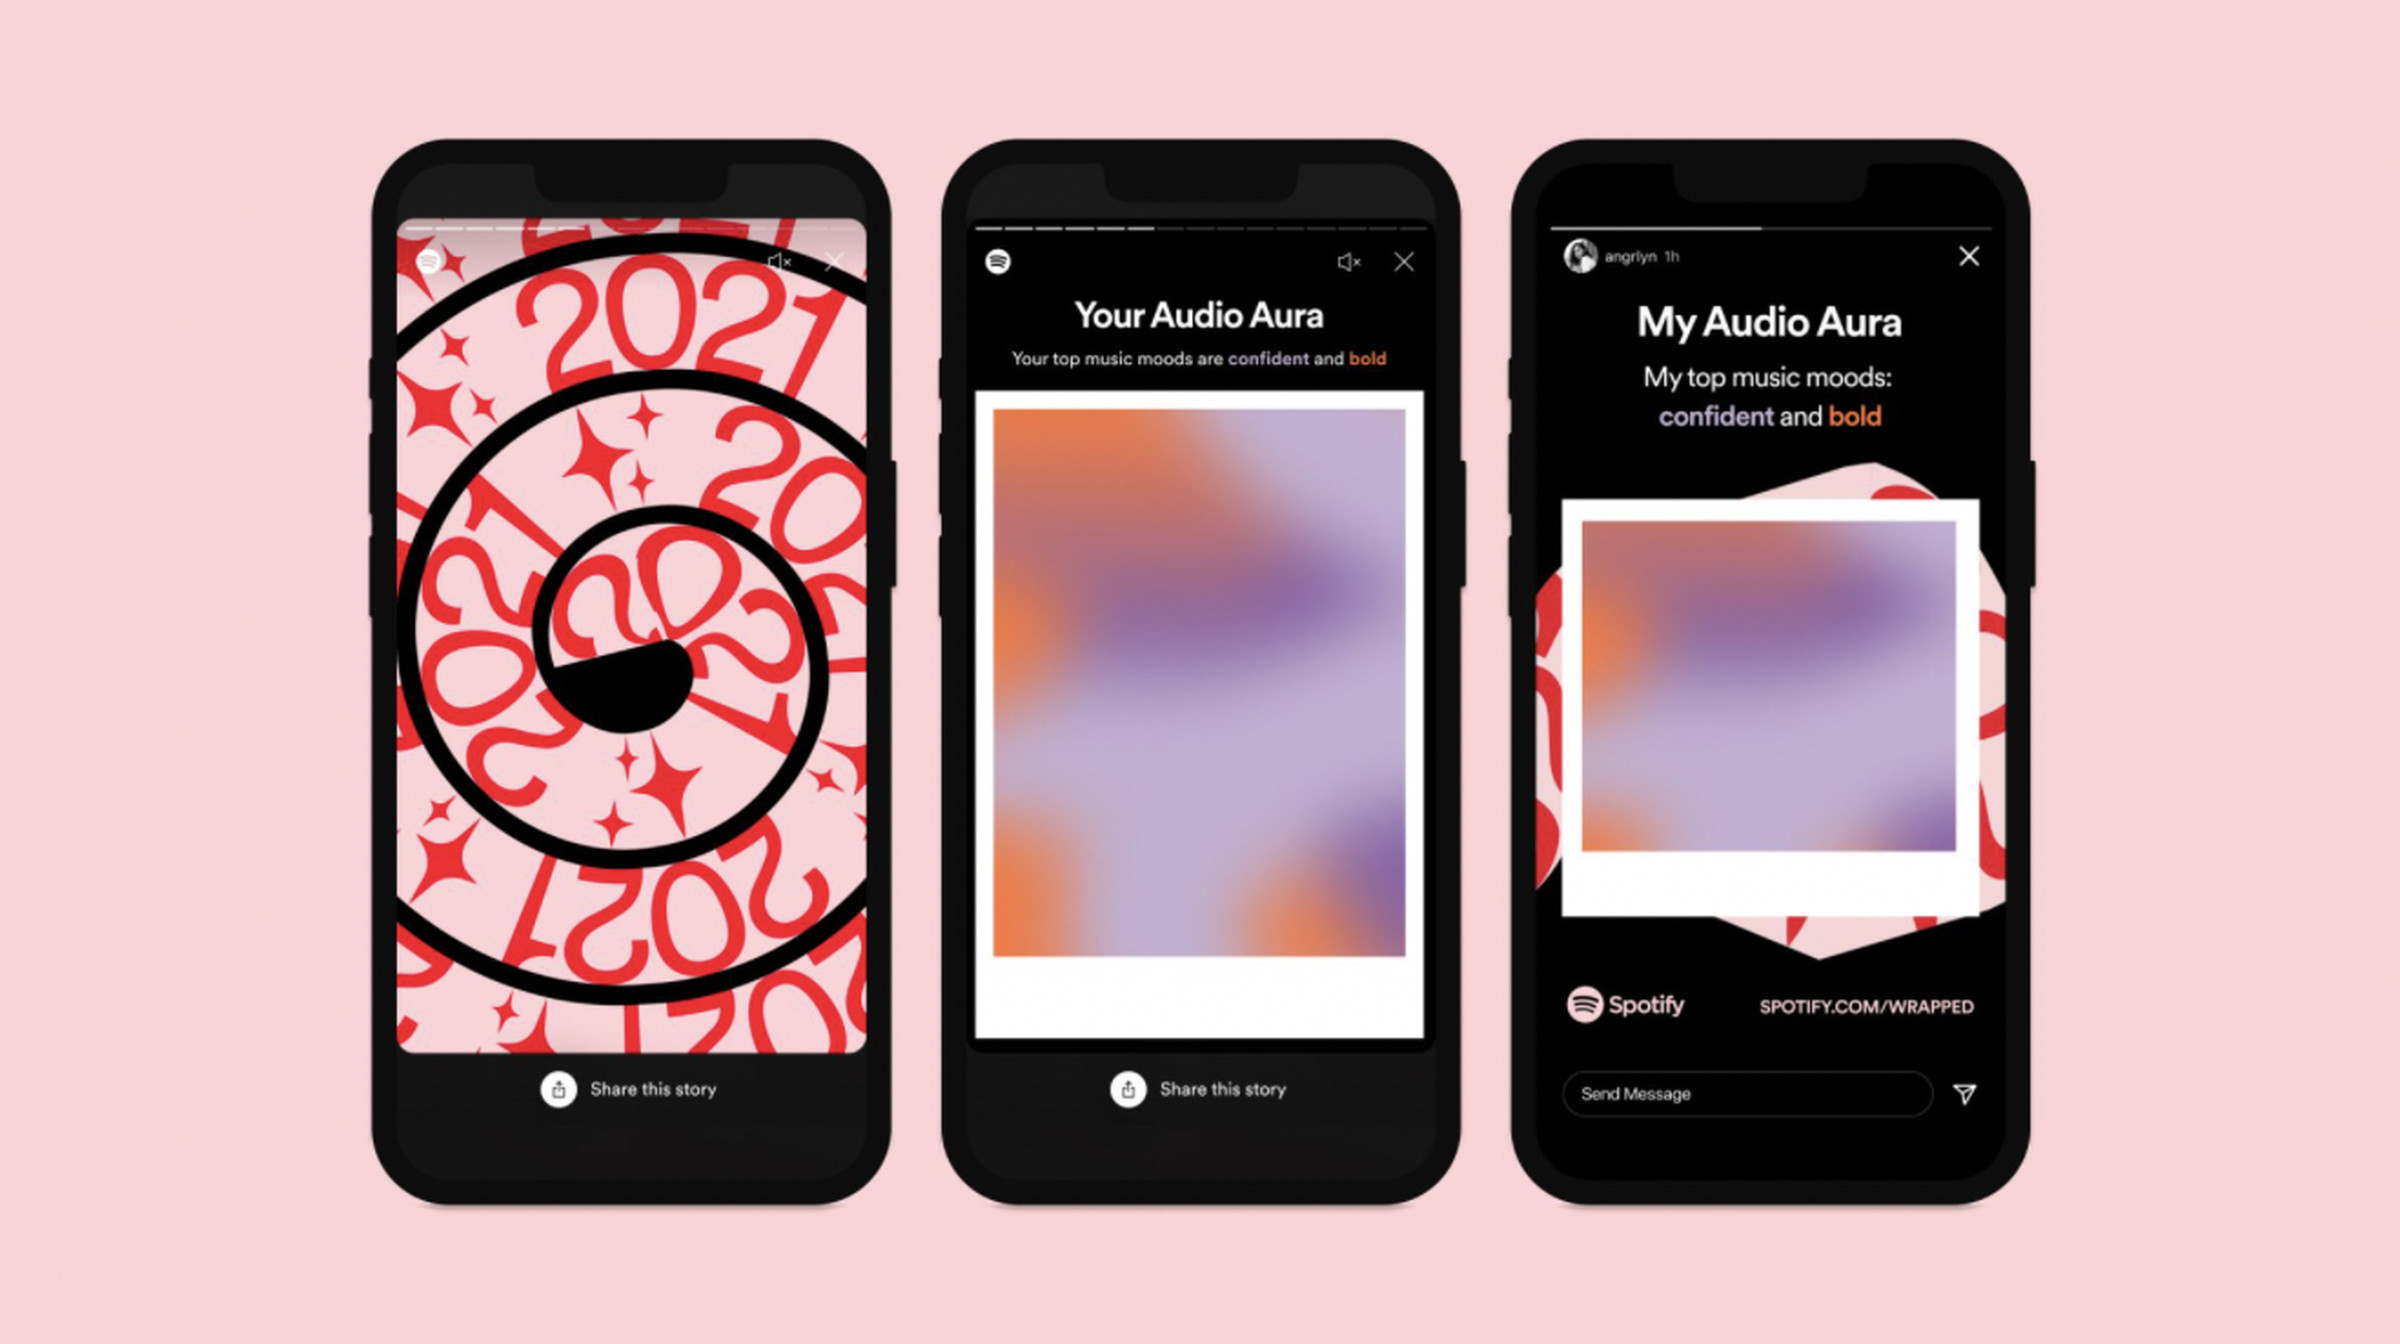 Three phones showing Spotify Wrapped’s new feature audio aura